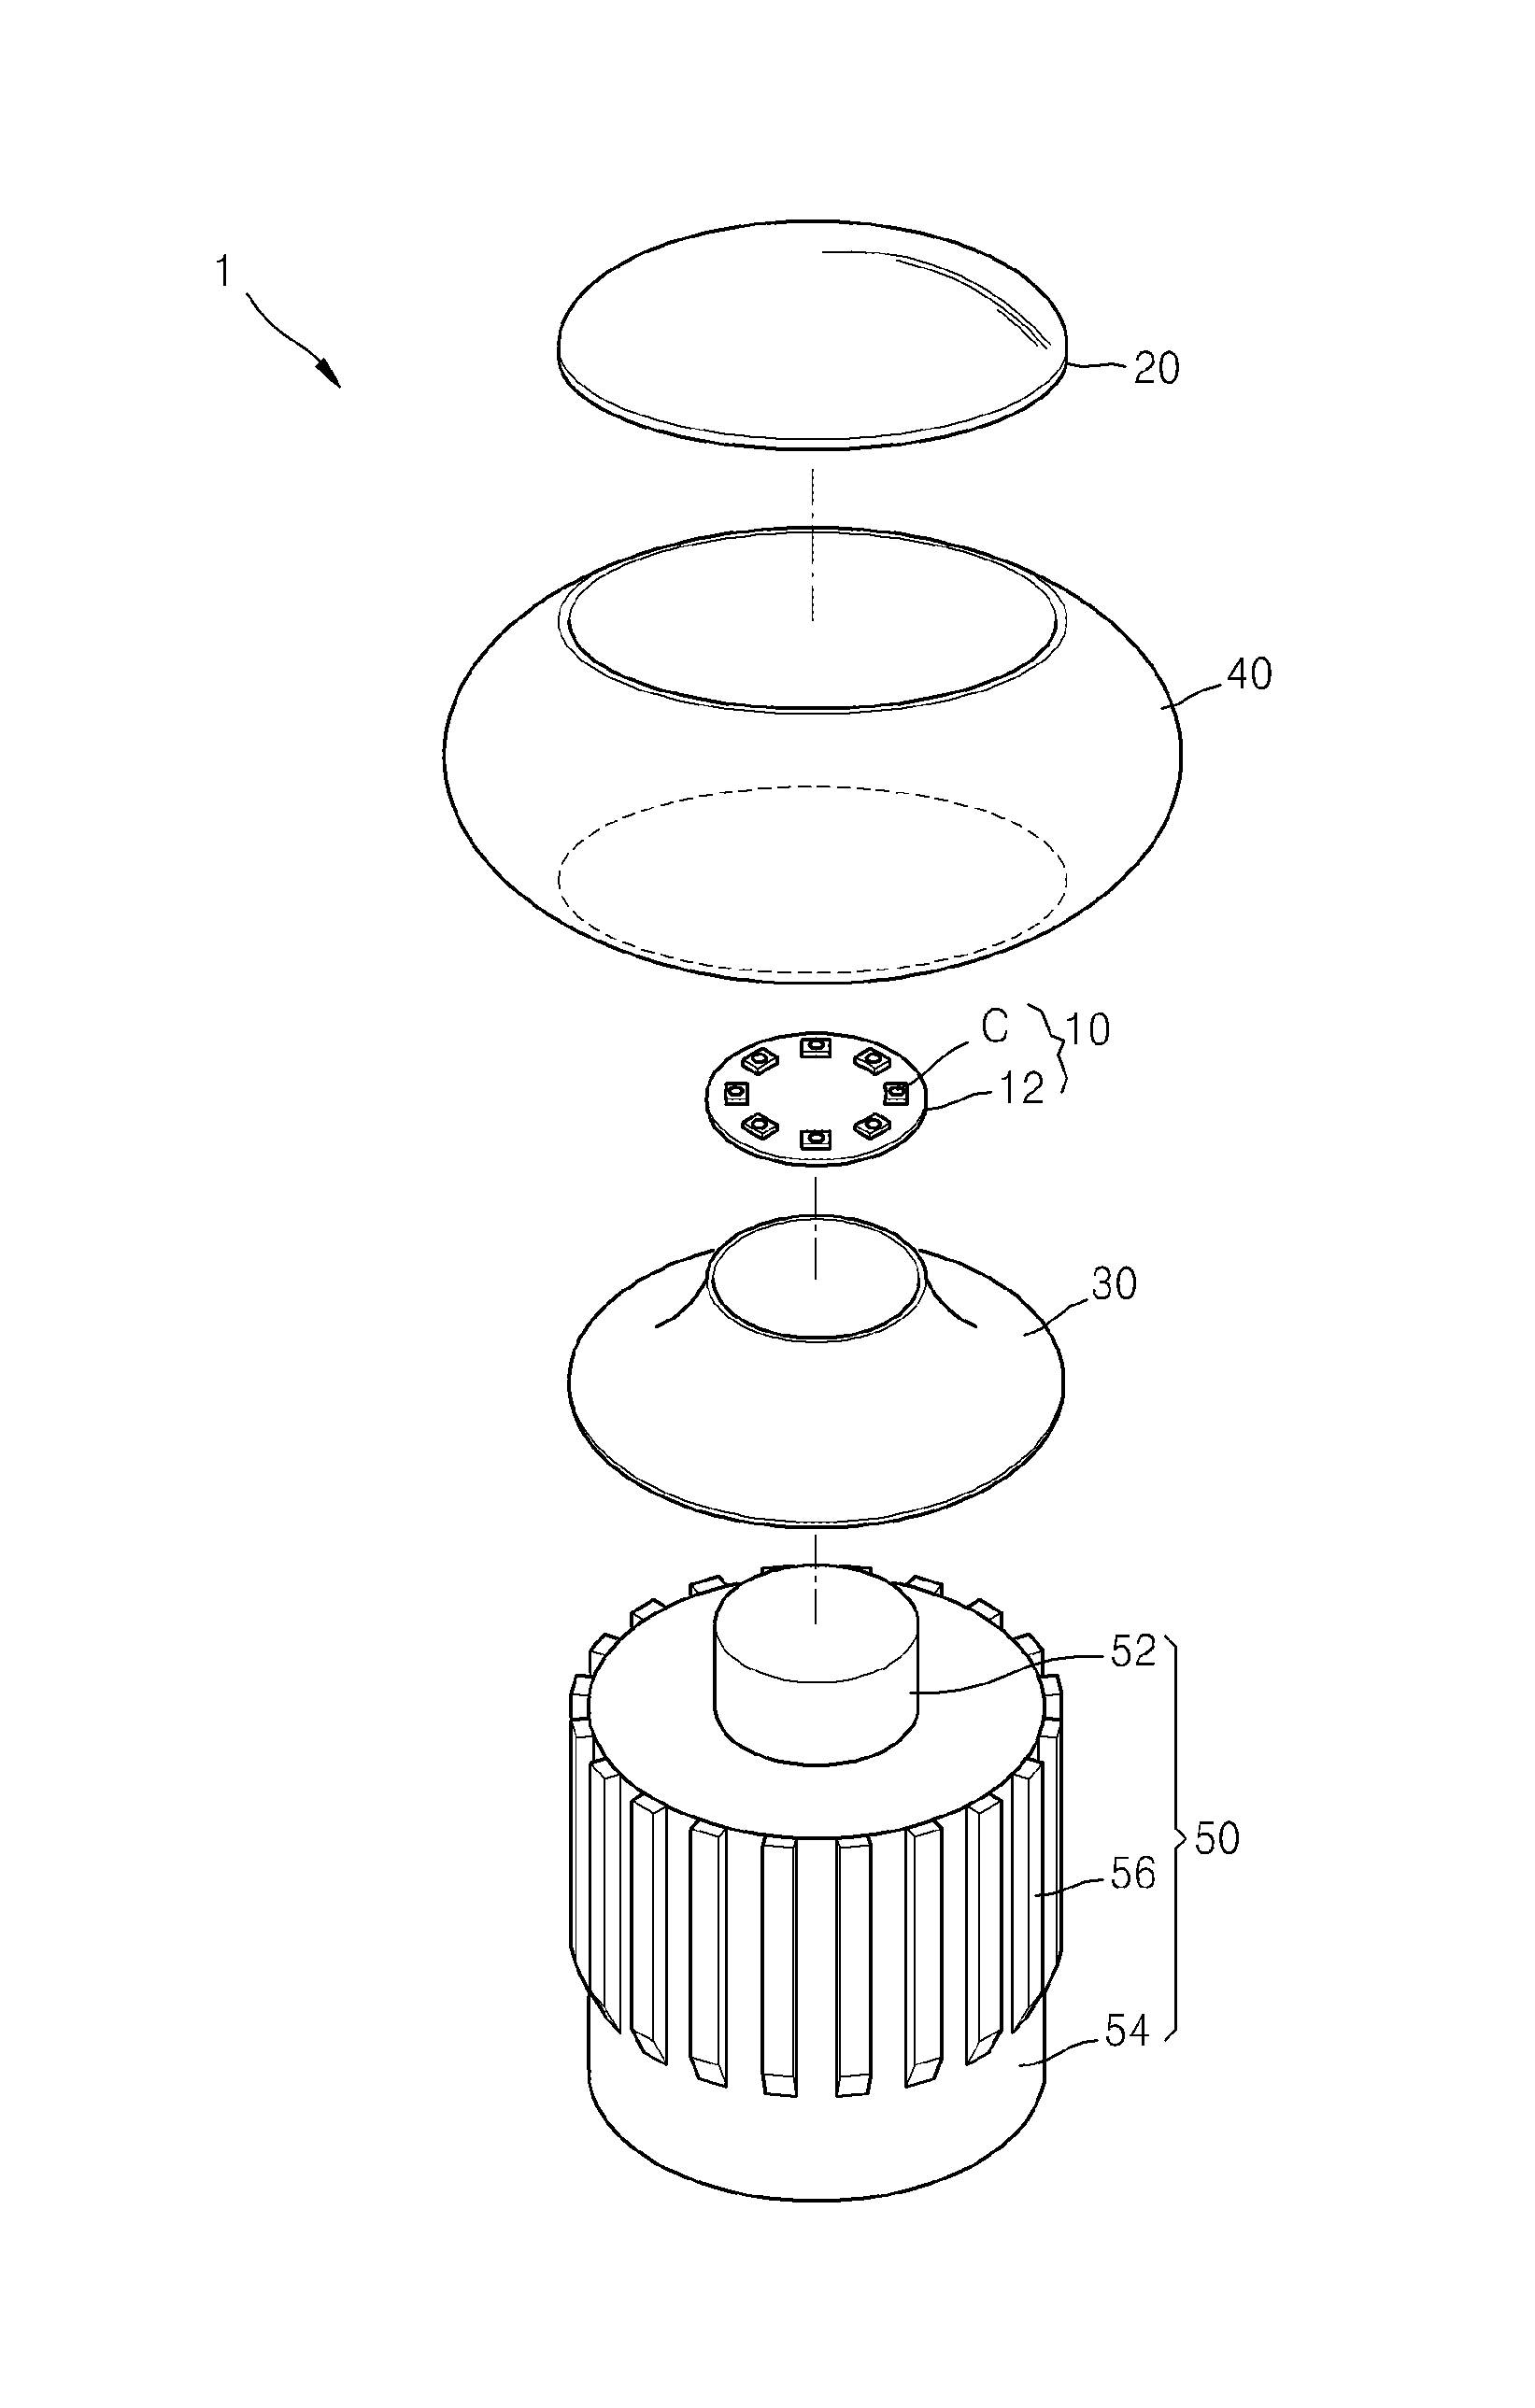 Lighting device capable of emitting light with a wide angle